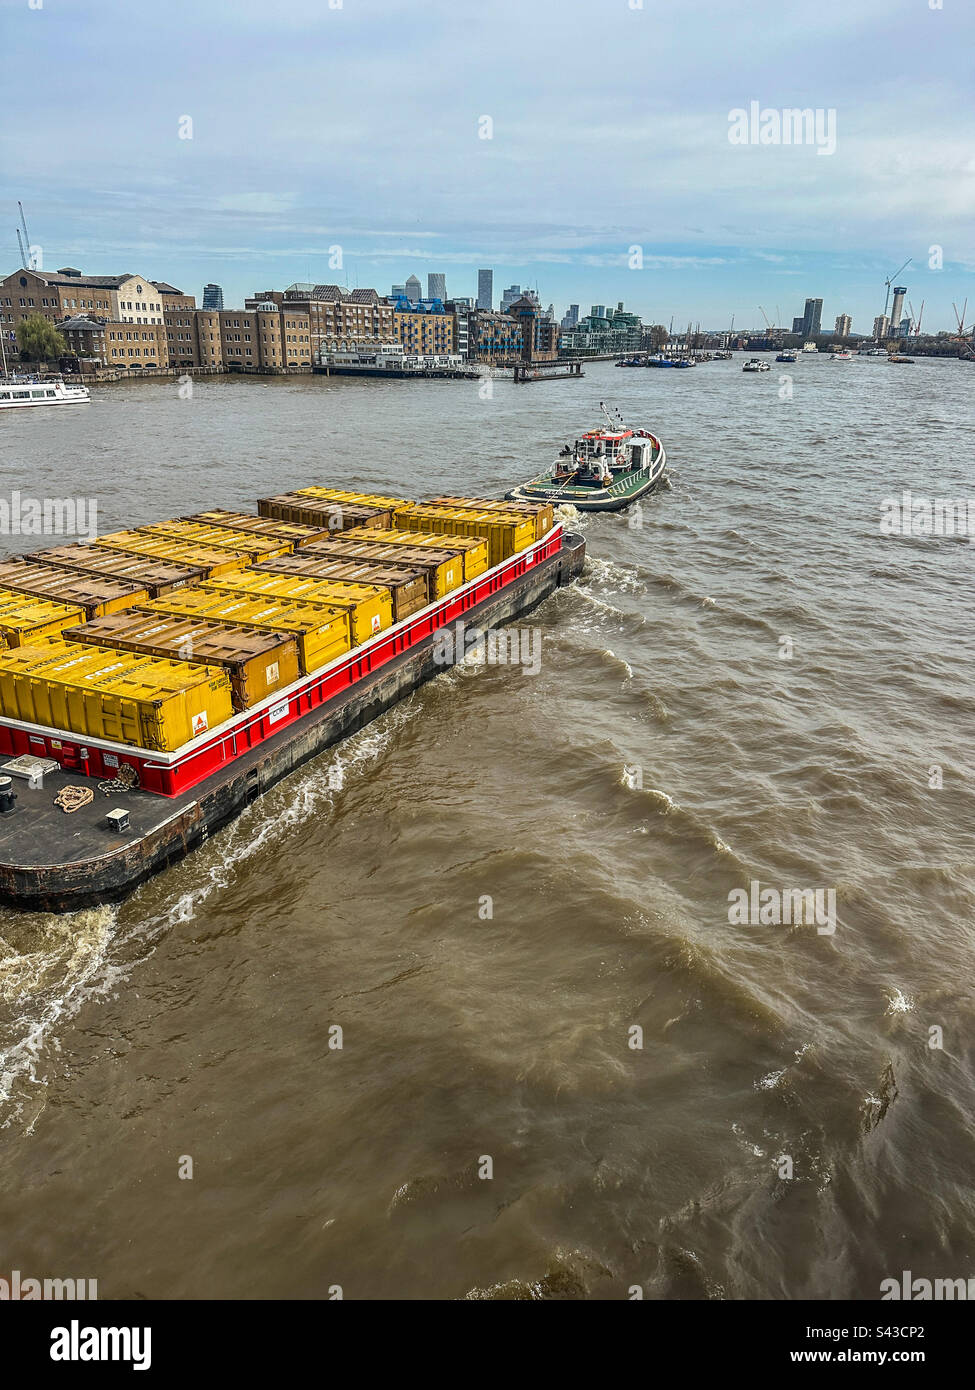 Tug boat pulling large barge loaded with yellow shipping containers on the River Thames, London, England Stock Photo